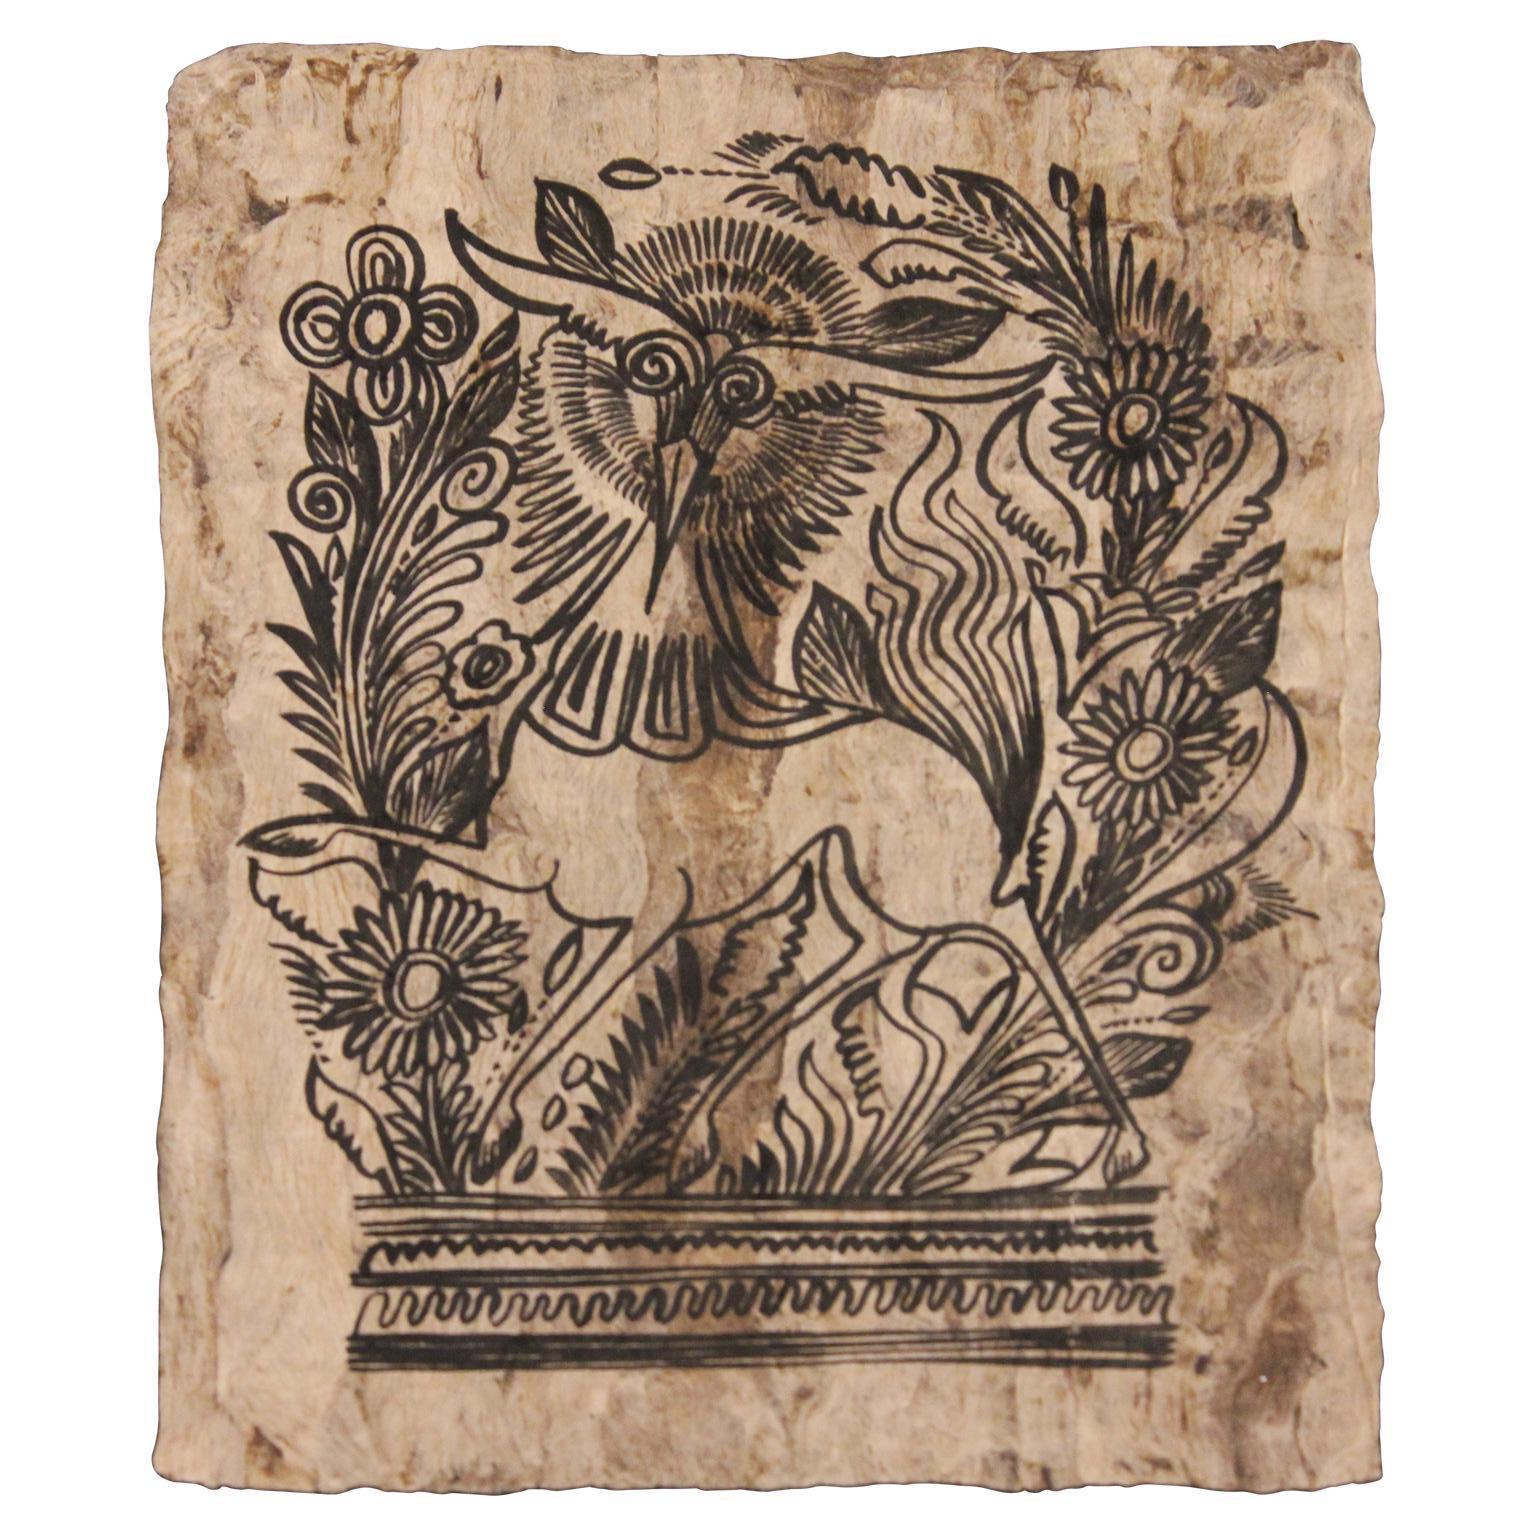 Unknown Animal Art - Mythical Creature with Foliage Painted on Handmade Paper